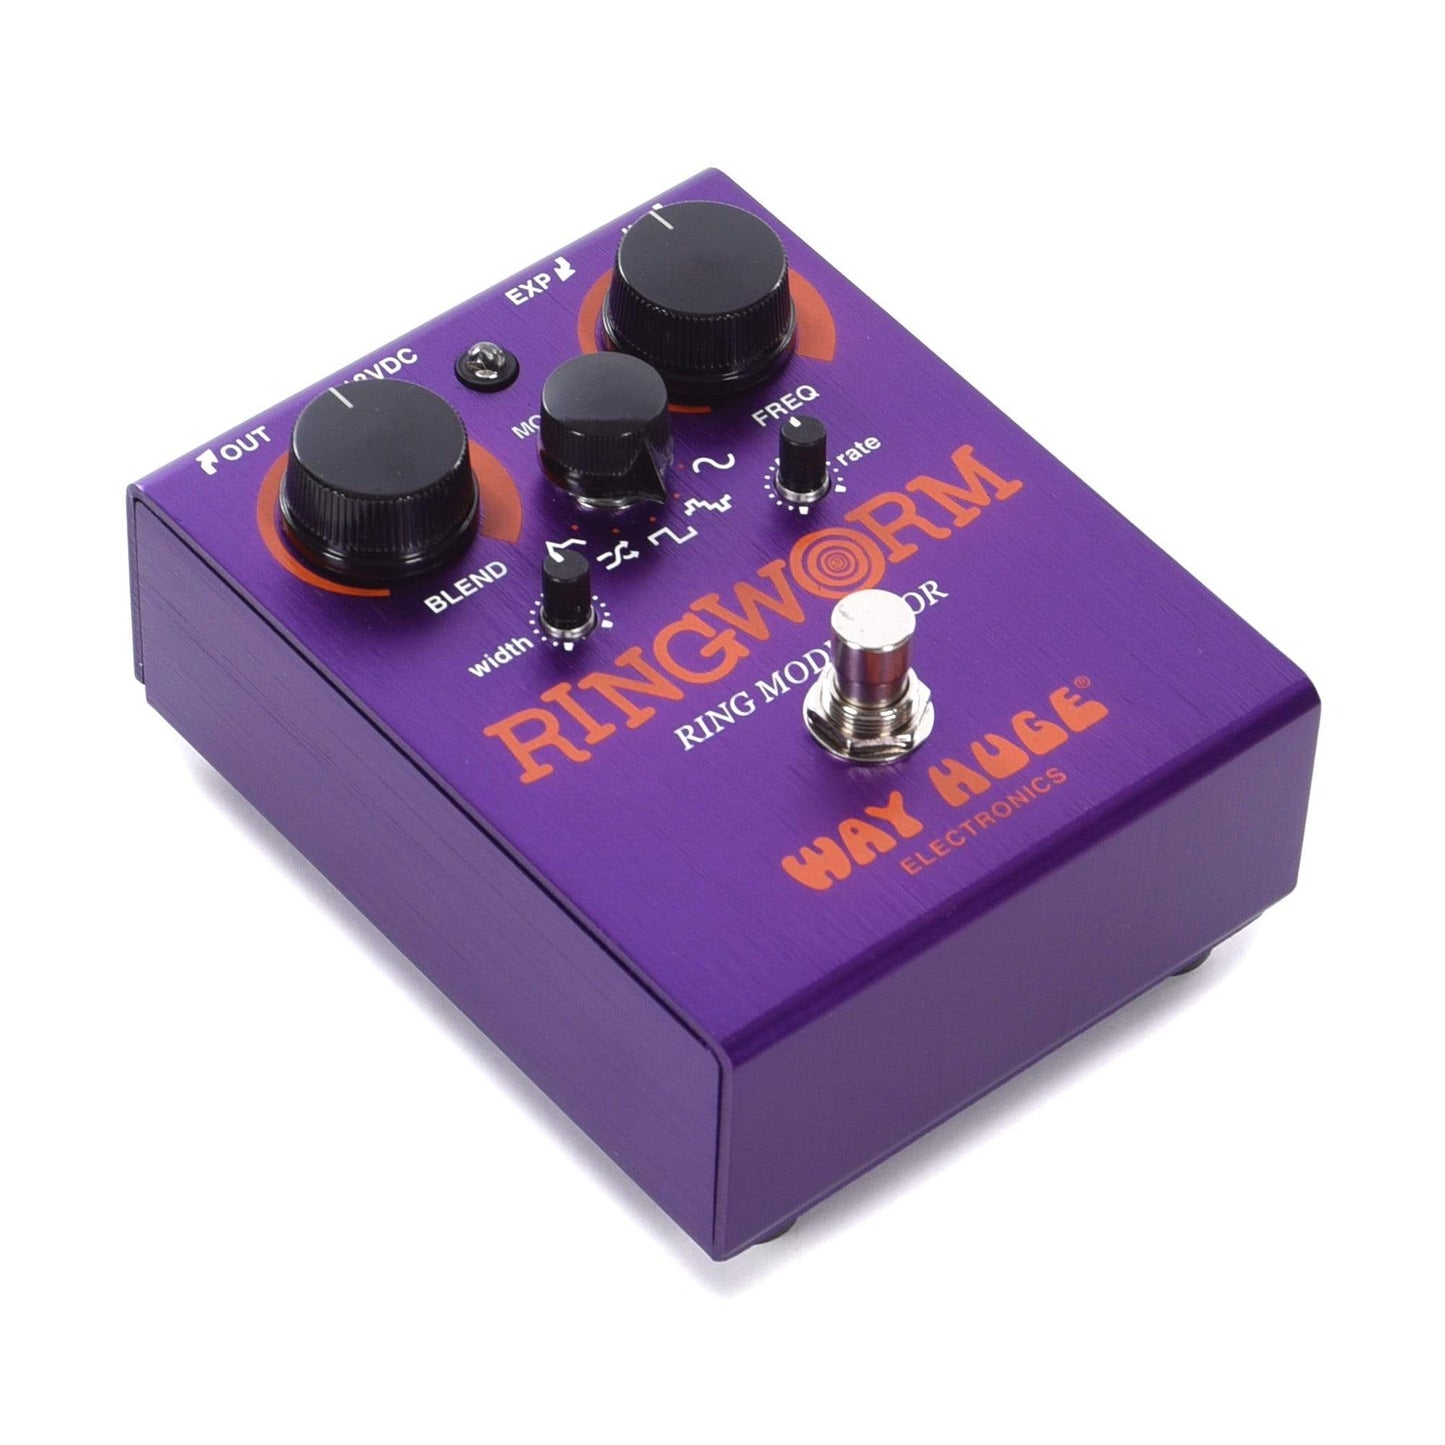 Way Huge Ring Worm Ring Modulator Reissue Limited Edition Effects and Pedals / Ring Modulators